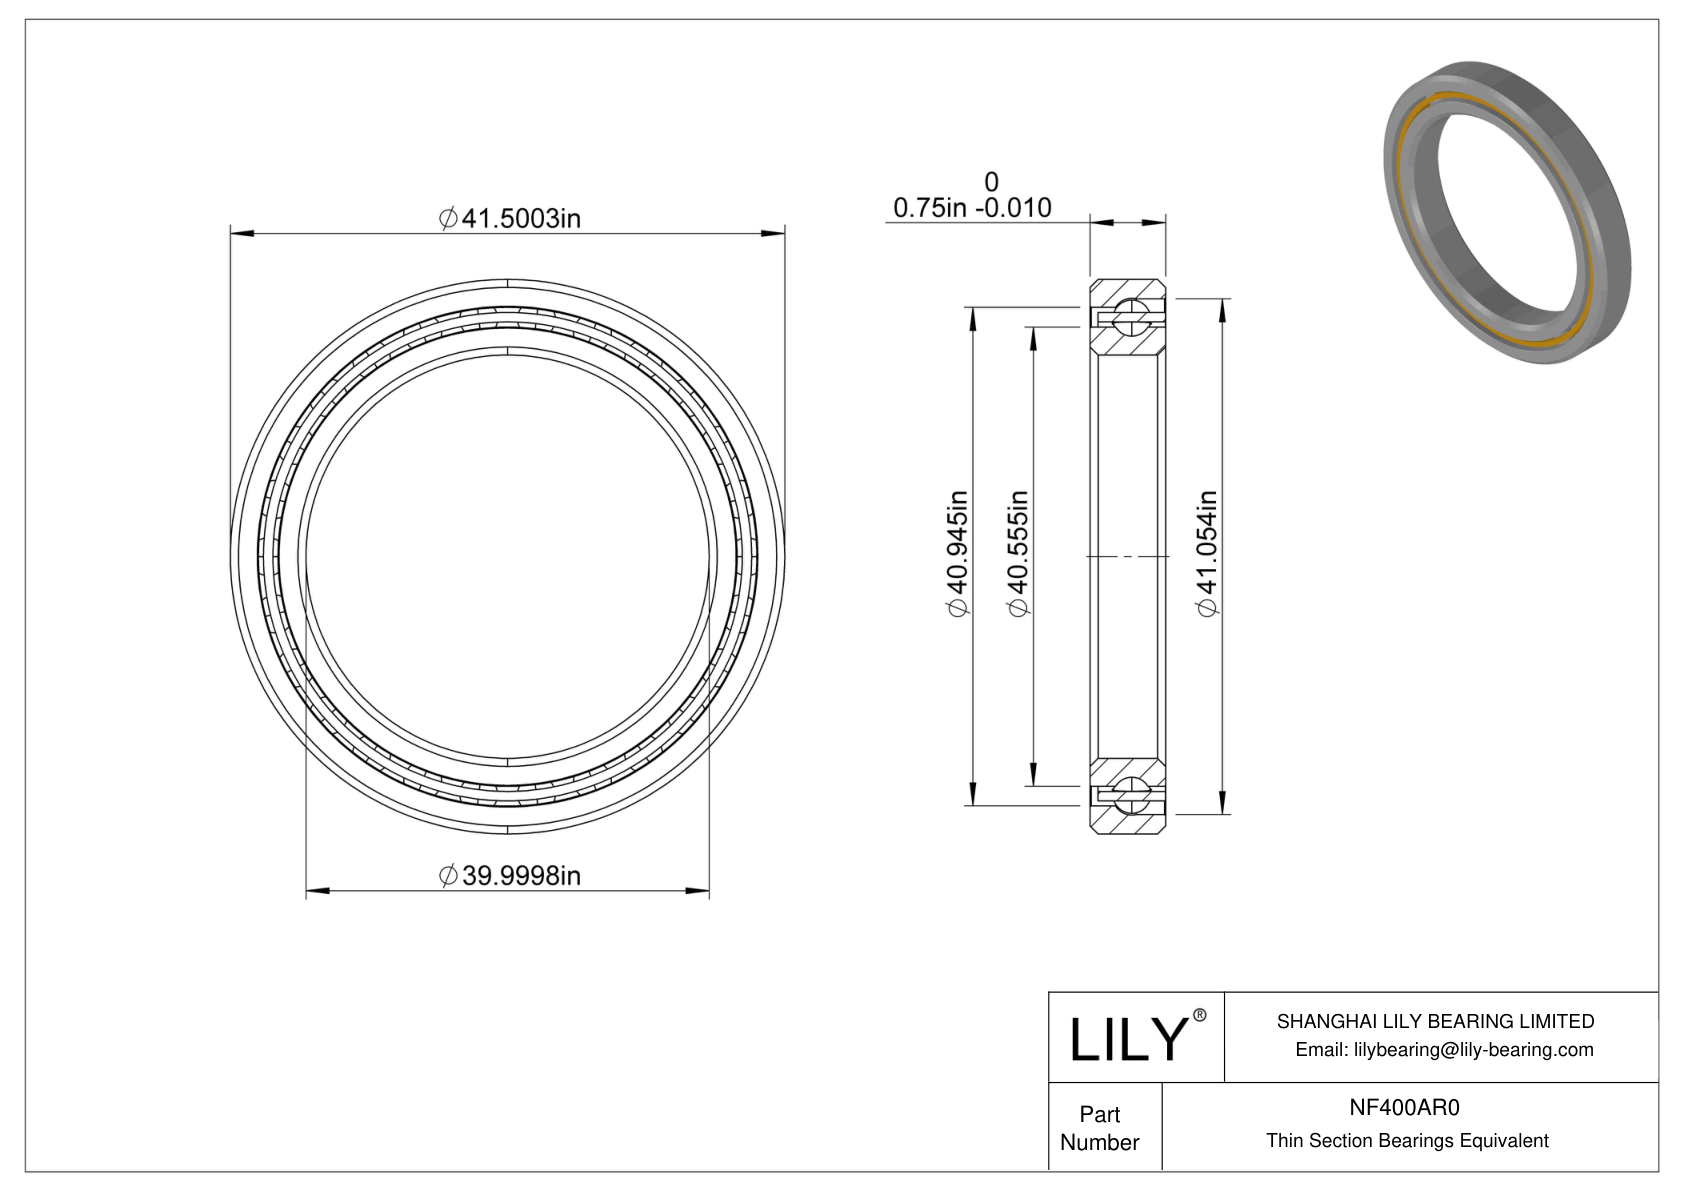 NF400AR0 Constant Section (CS) Bearings cad drawing